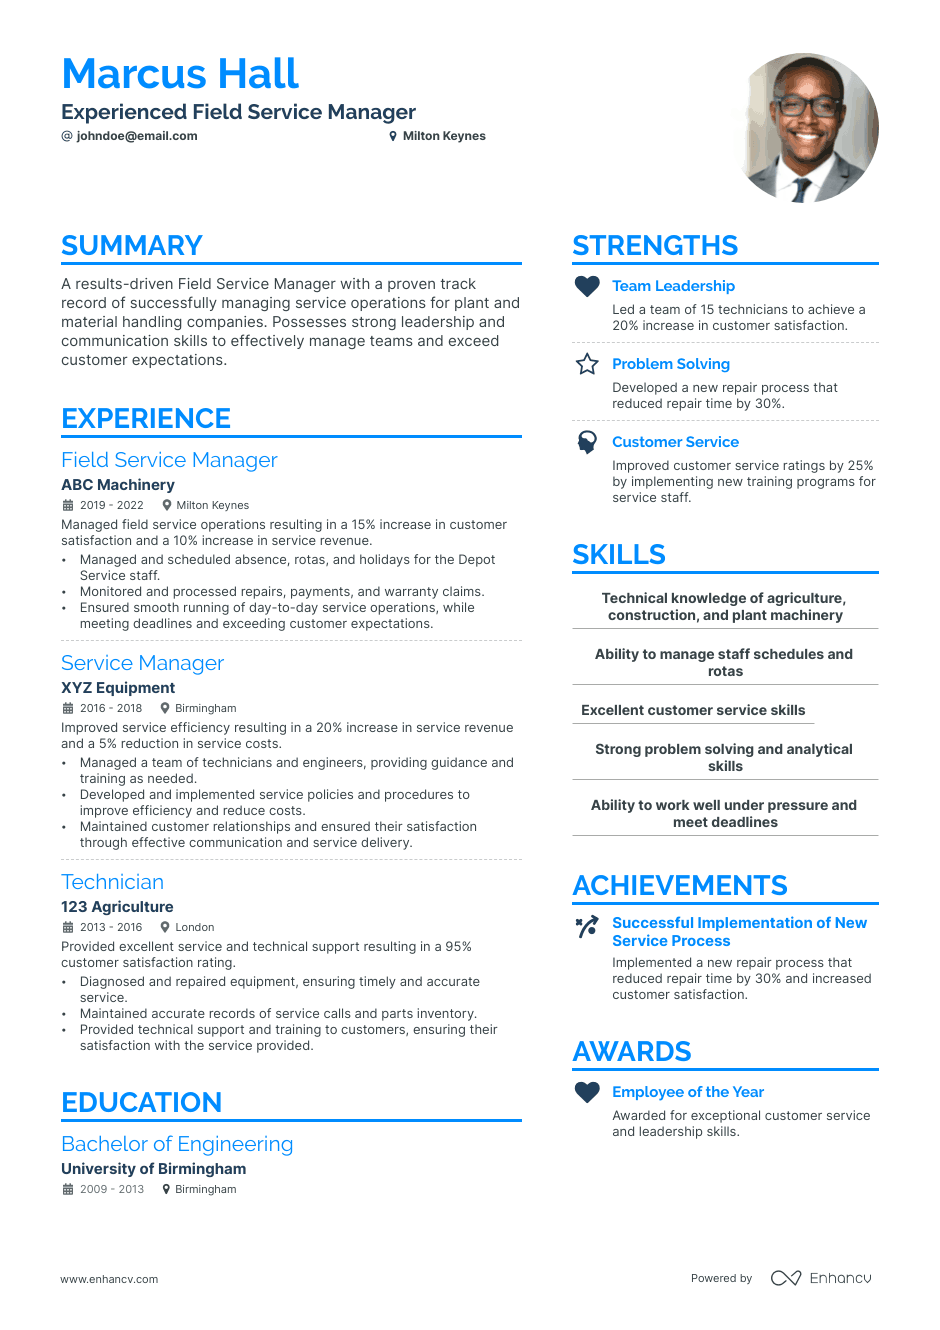 Field Service Manager resume example